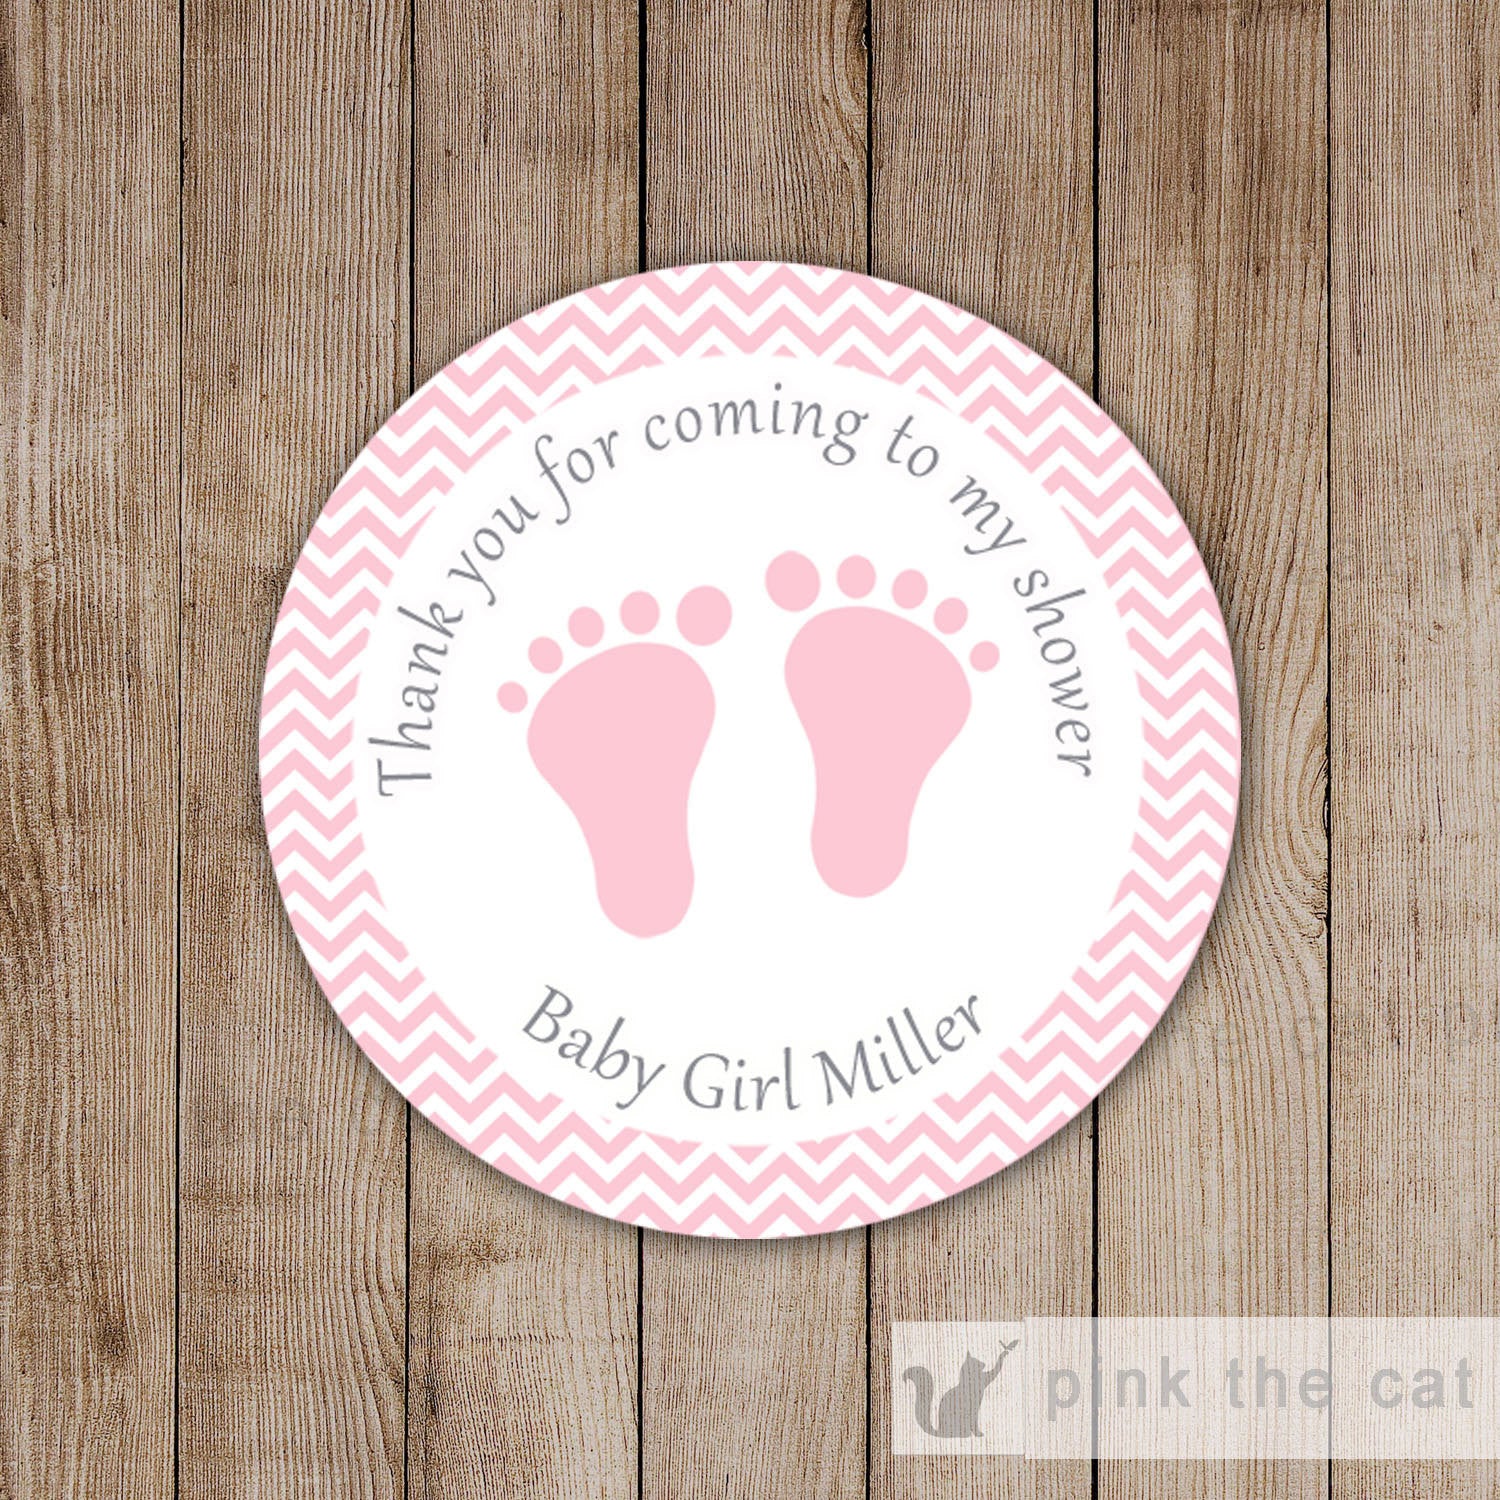 Chevron Pink Gift Favor Labels Sticker Tags Baby Girl Shower